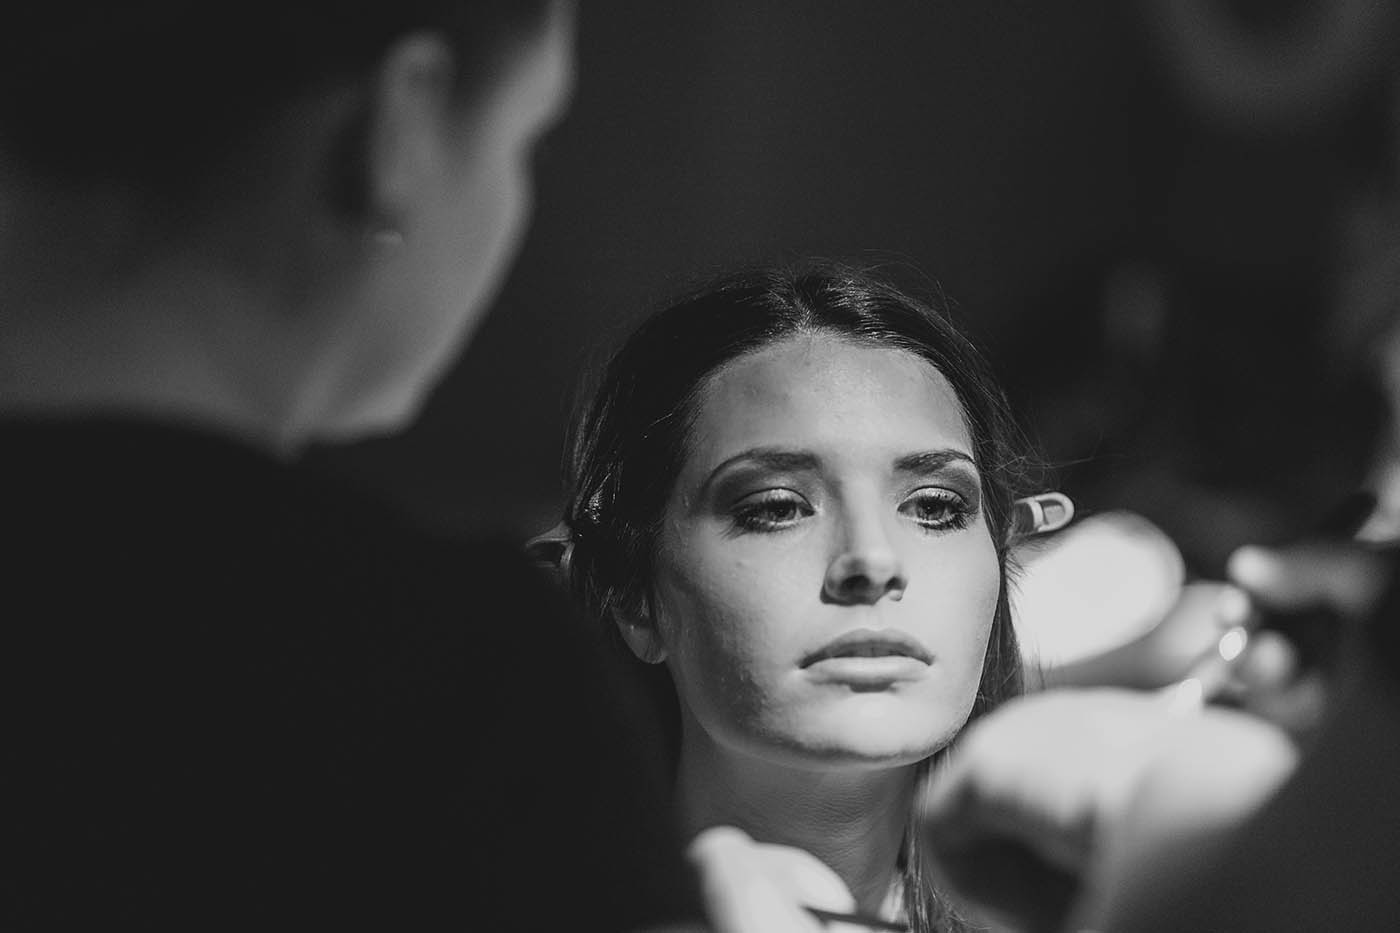 hair and makeup , liverpool fashion week , bts, behind the scenes